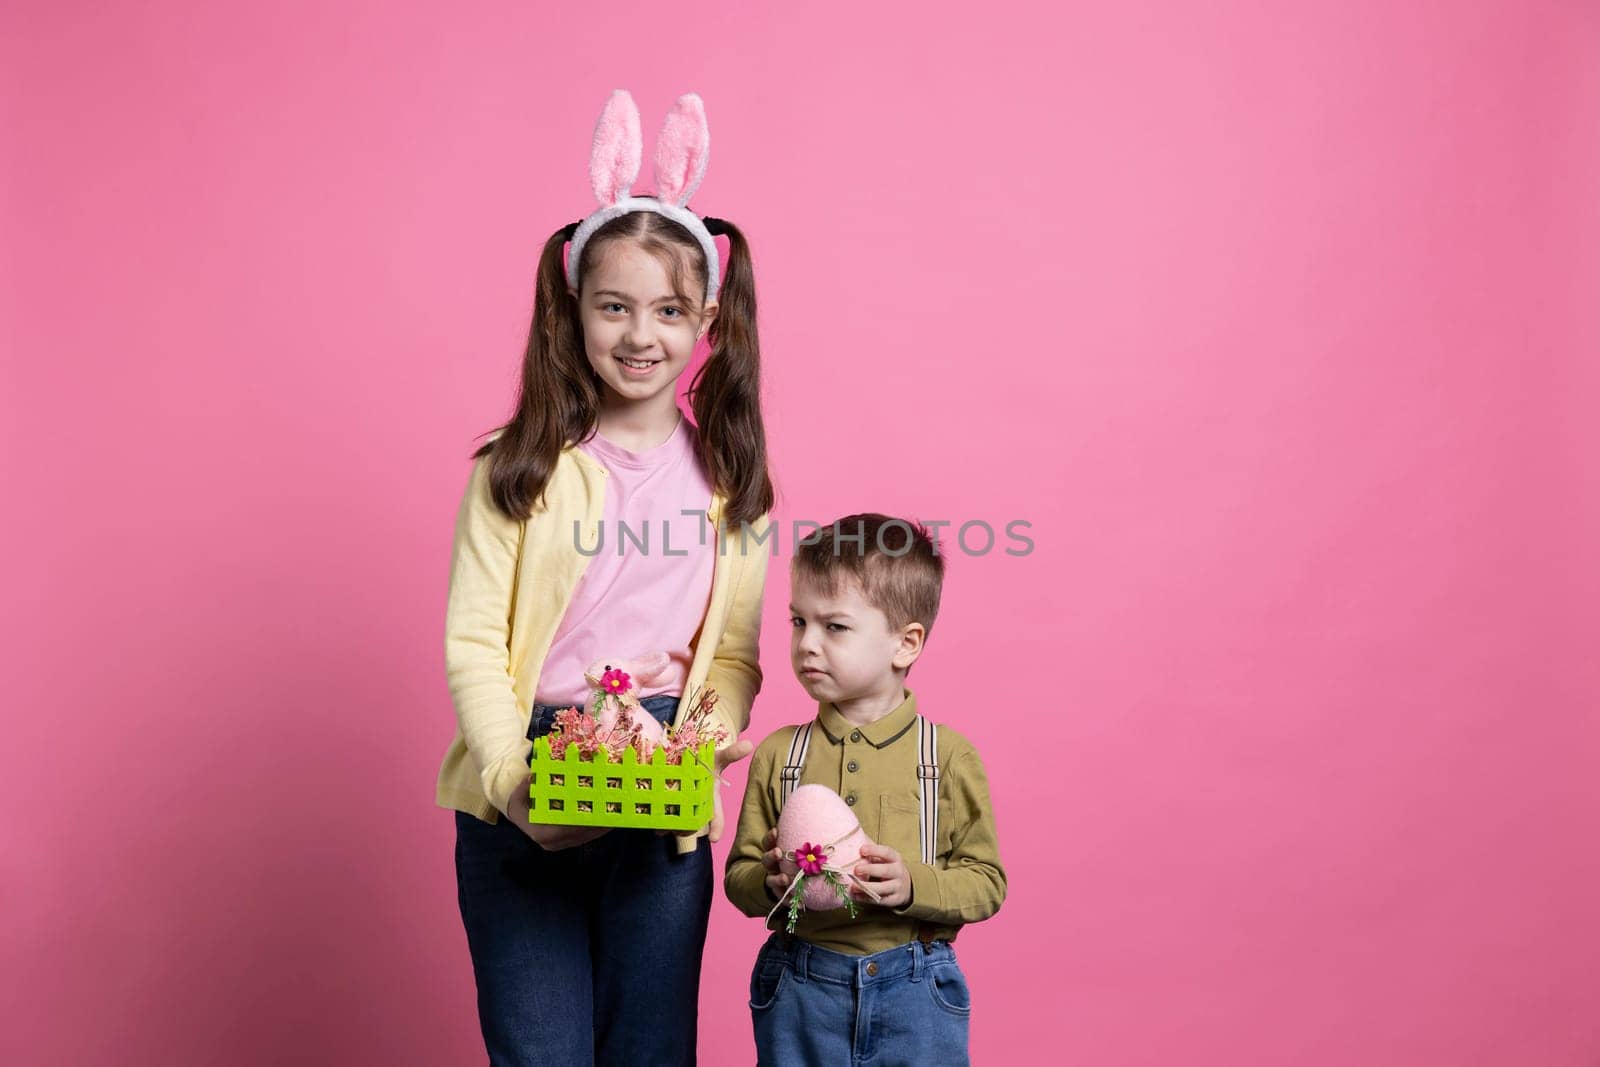 Playful children showing painted eggs and decorating for easter celebration festivity, standing together over pink background. Brother and sister feeling cheerful and enthusiastic about april event.